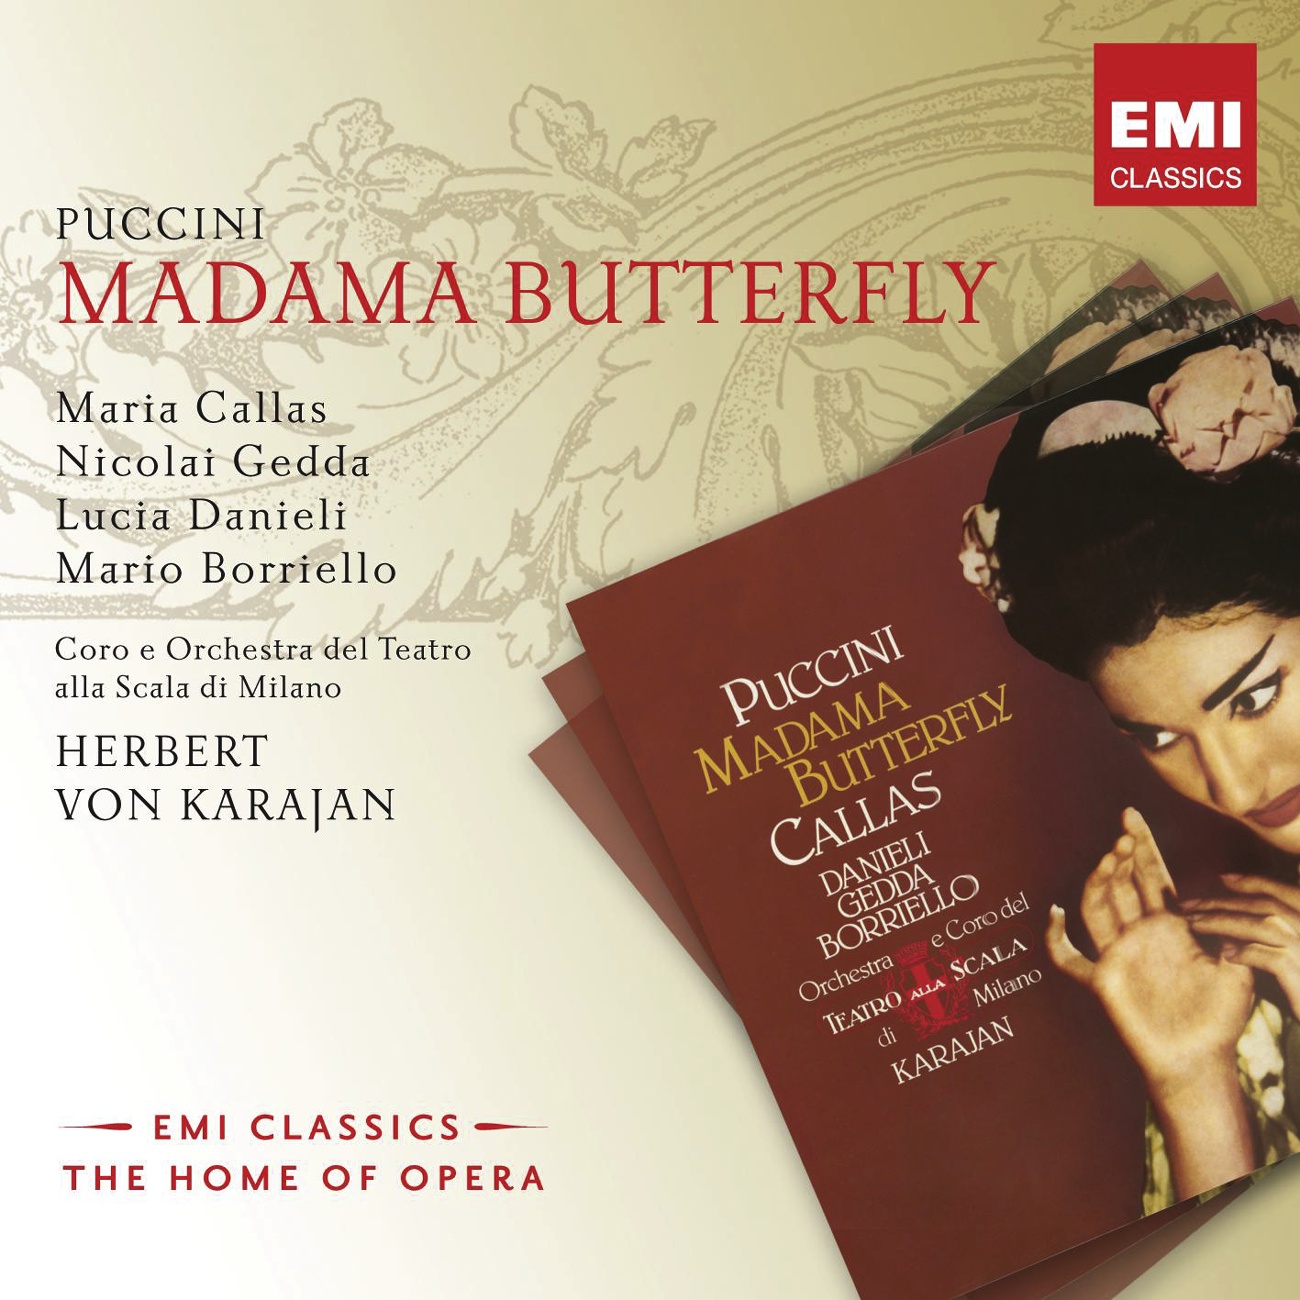 Madama Butterfly 2008 Remastered Version, Act II, First Part: C'e Entrate